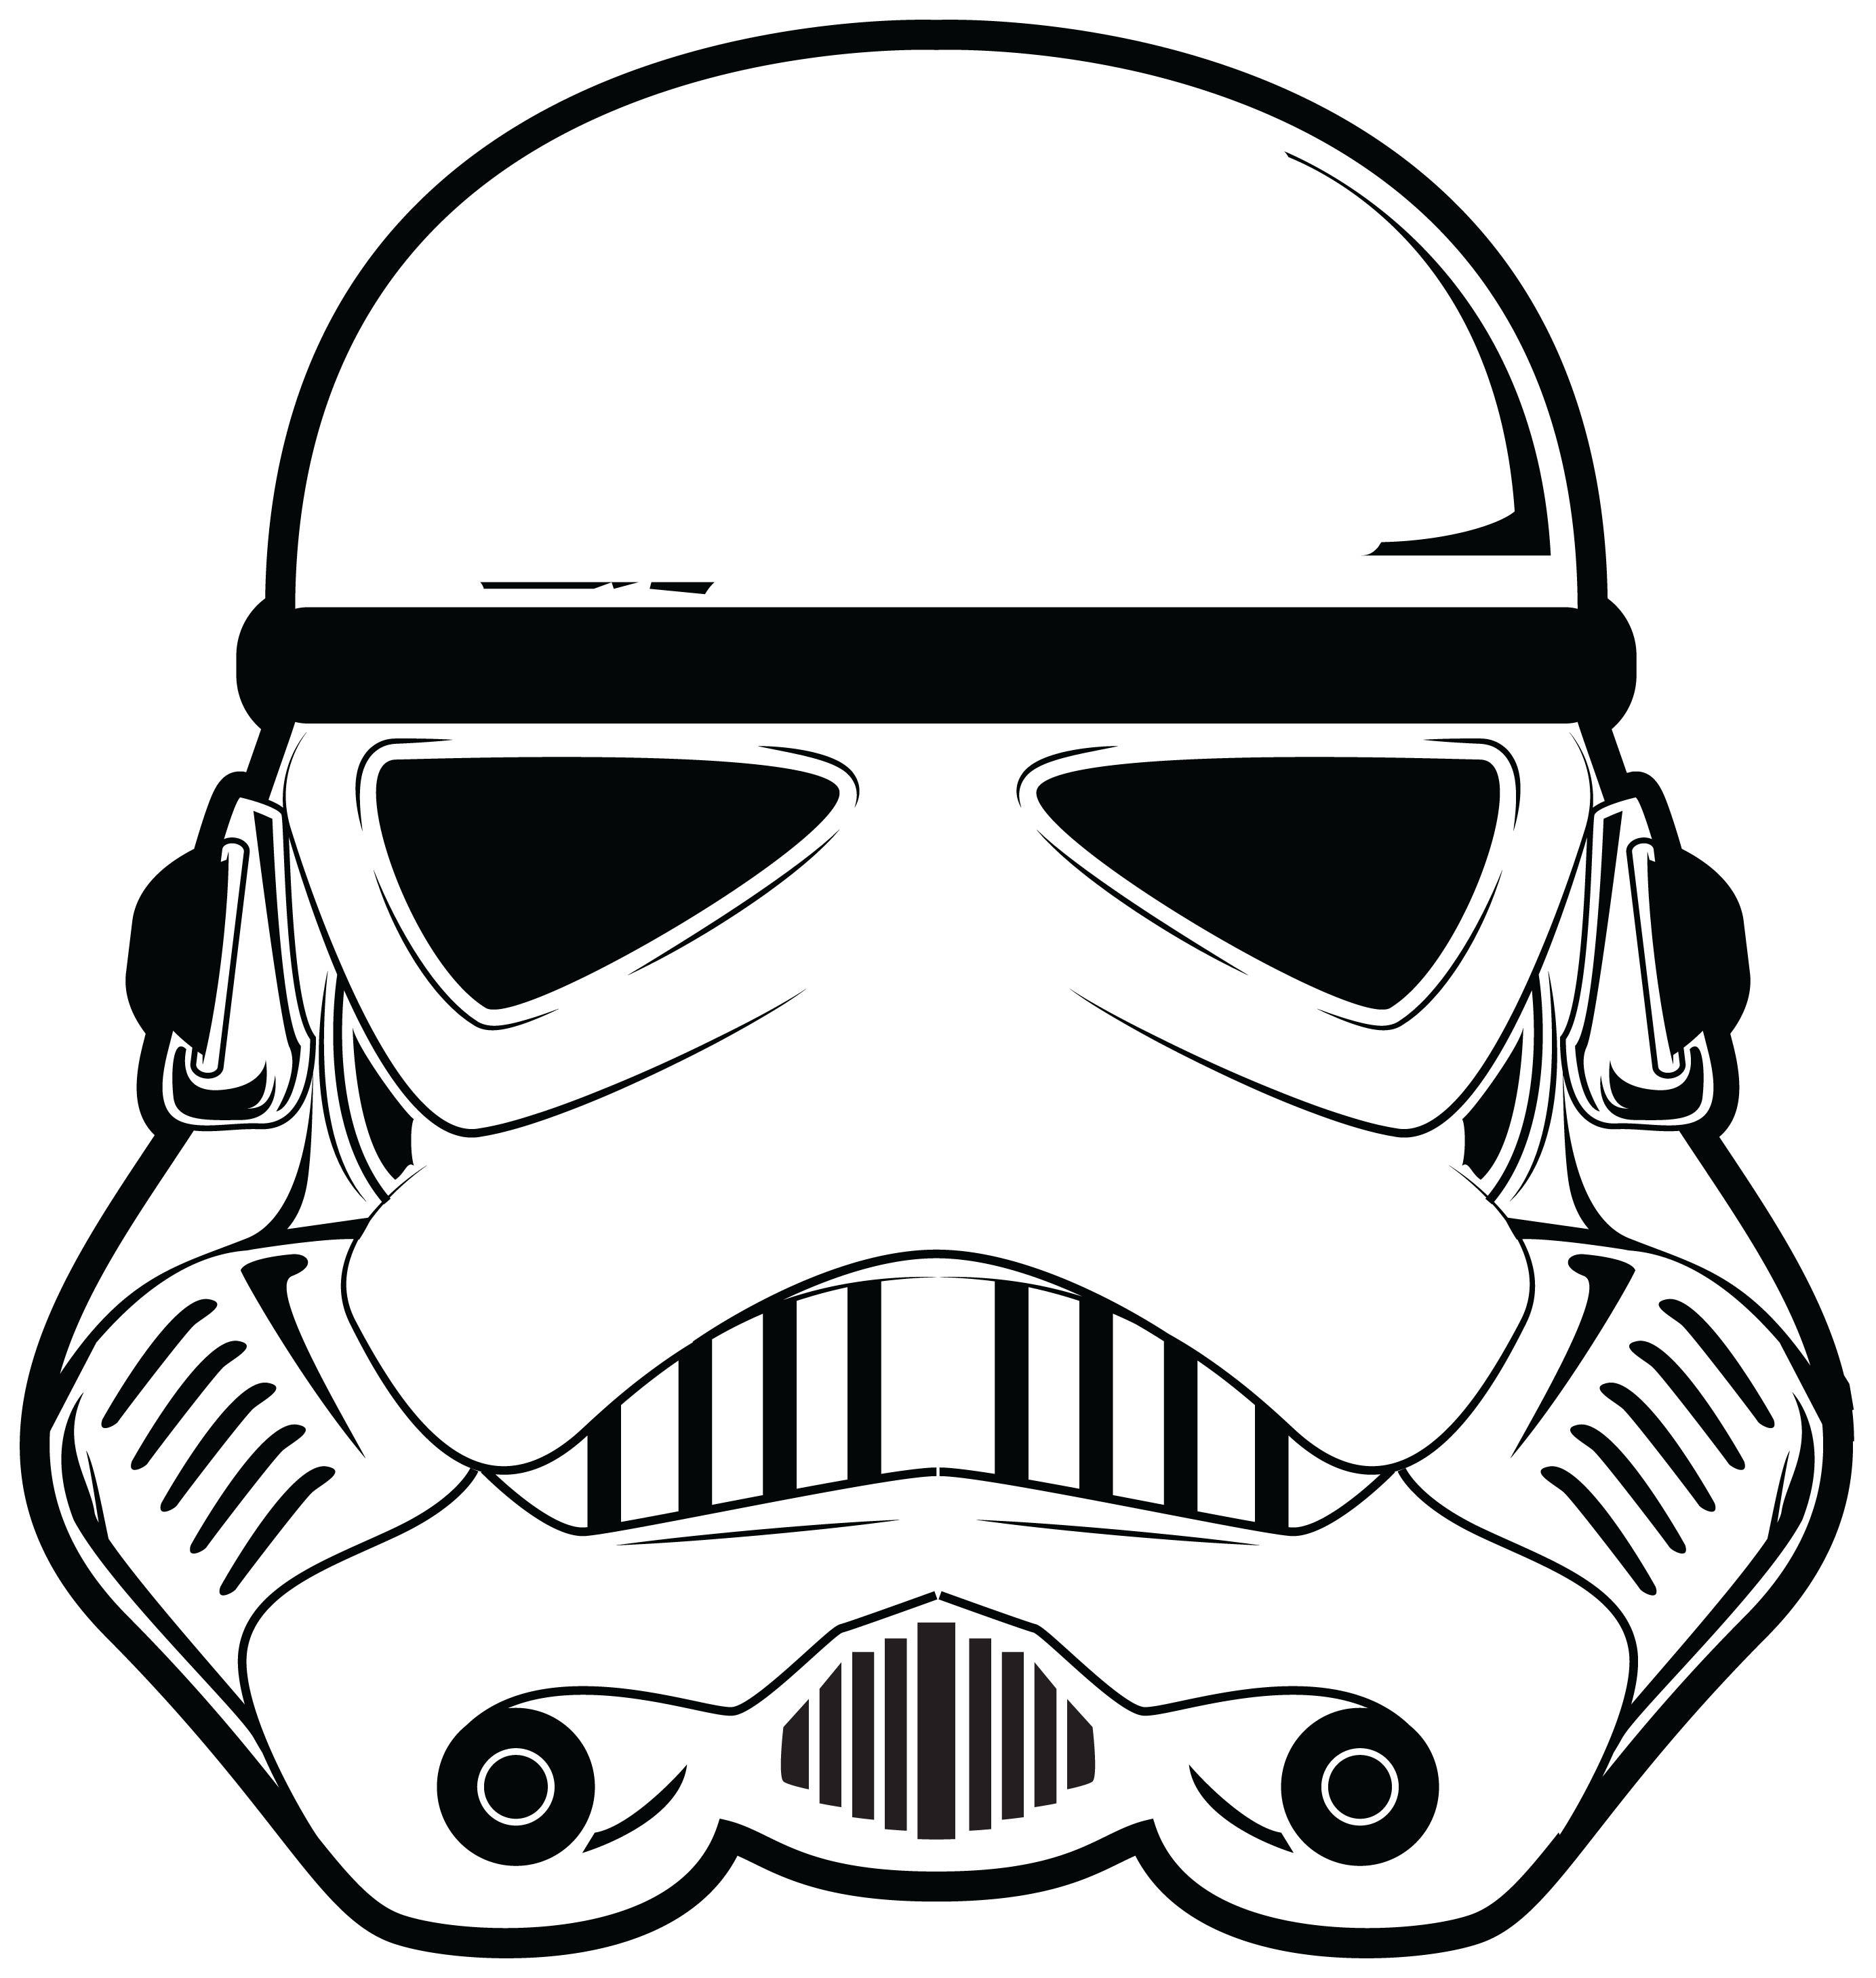 List 99+ Images star wars clip art black and white Stunning